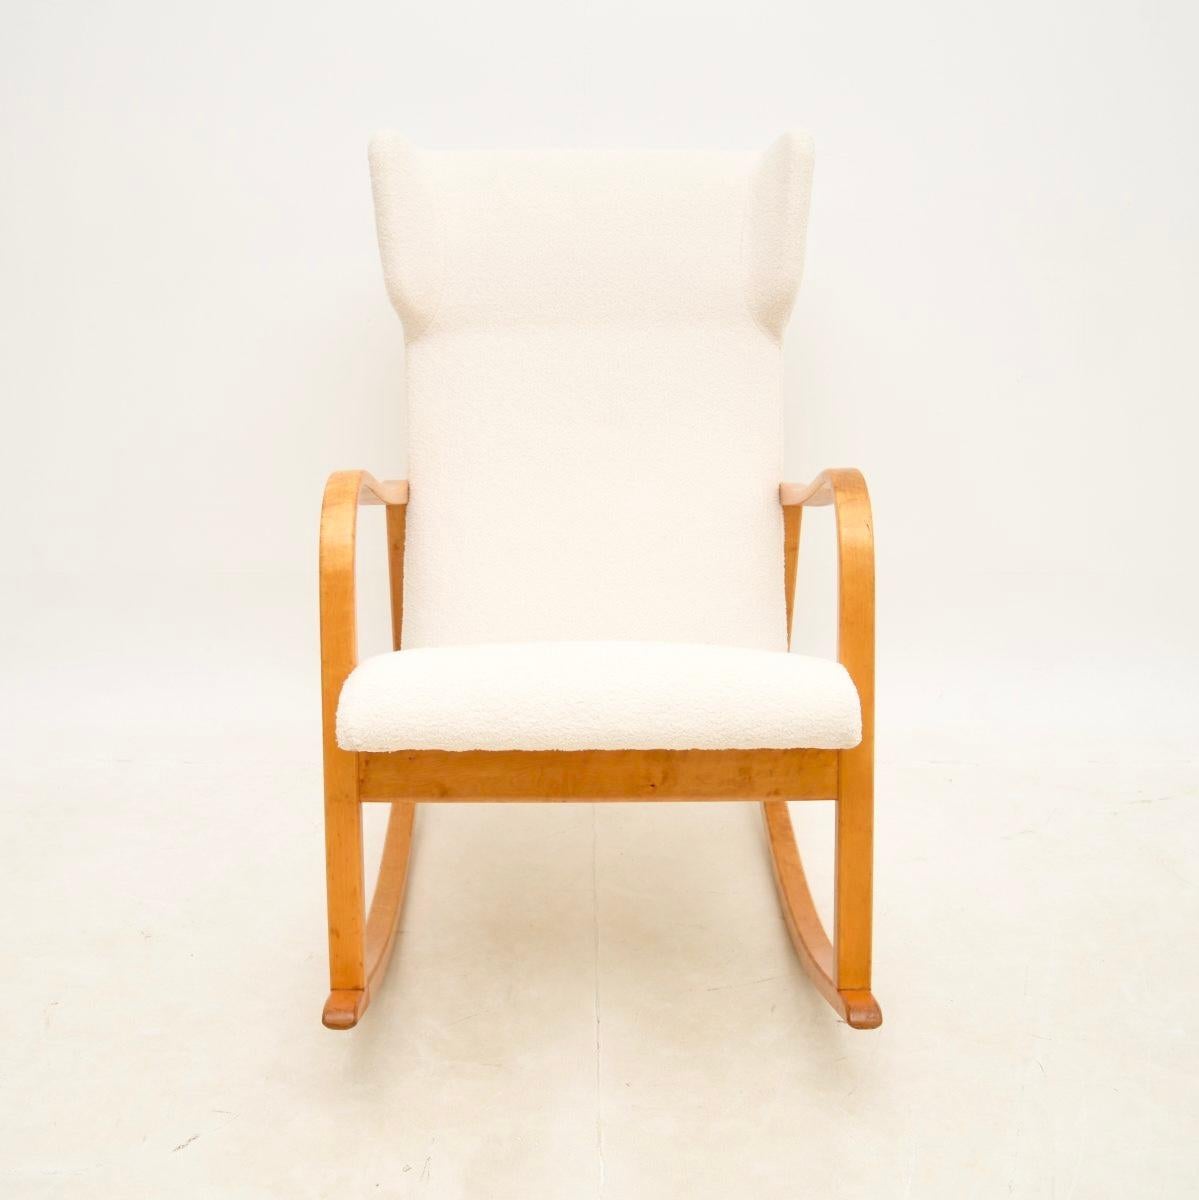 A very stylish and extremely comfortable vintage Swedish rocking chair in satin birch, dating from the 1960’s.

The quality is superb and this is extremely comfortable to relax in. The satin birch frame has a beautiful mellow colour tone and